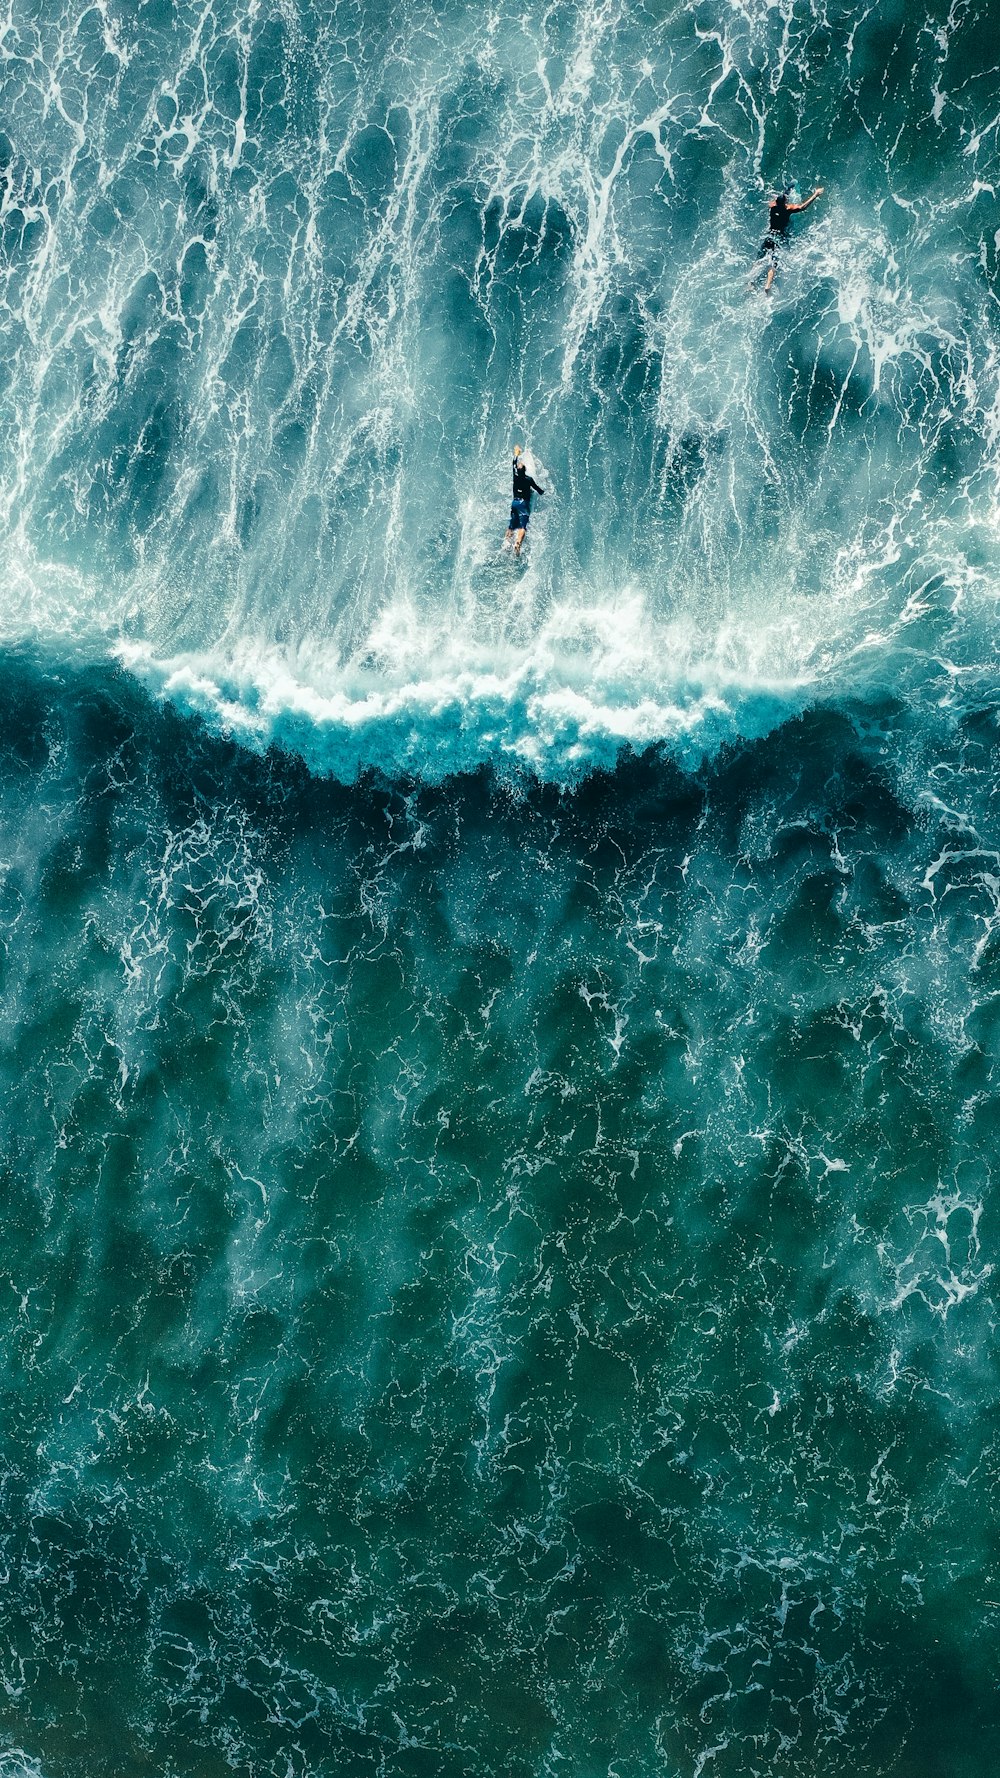 two surfers riding a large wave in the ocean